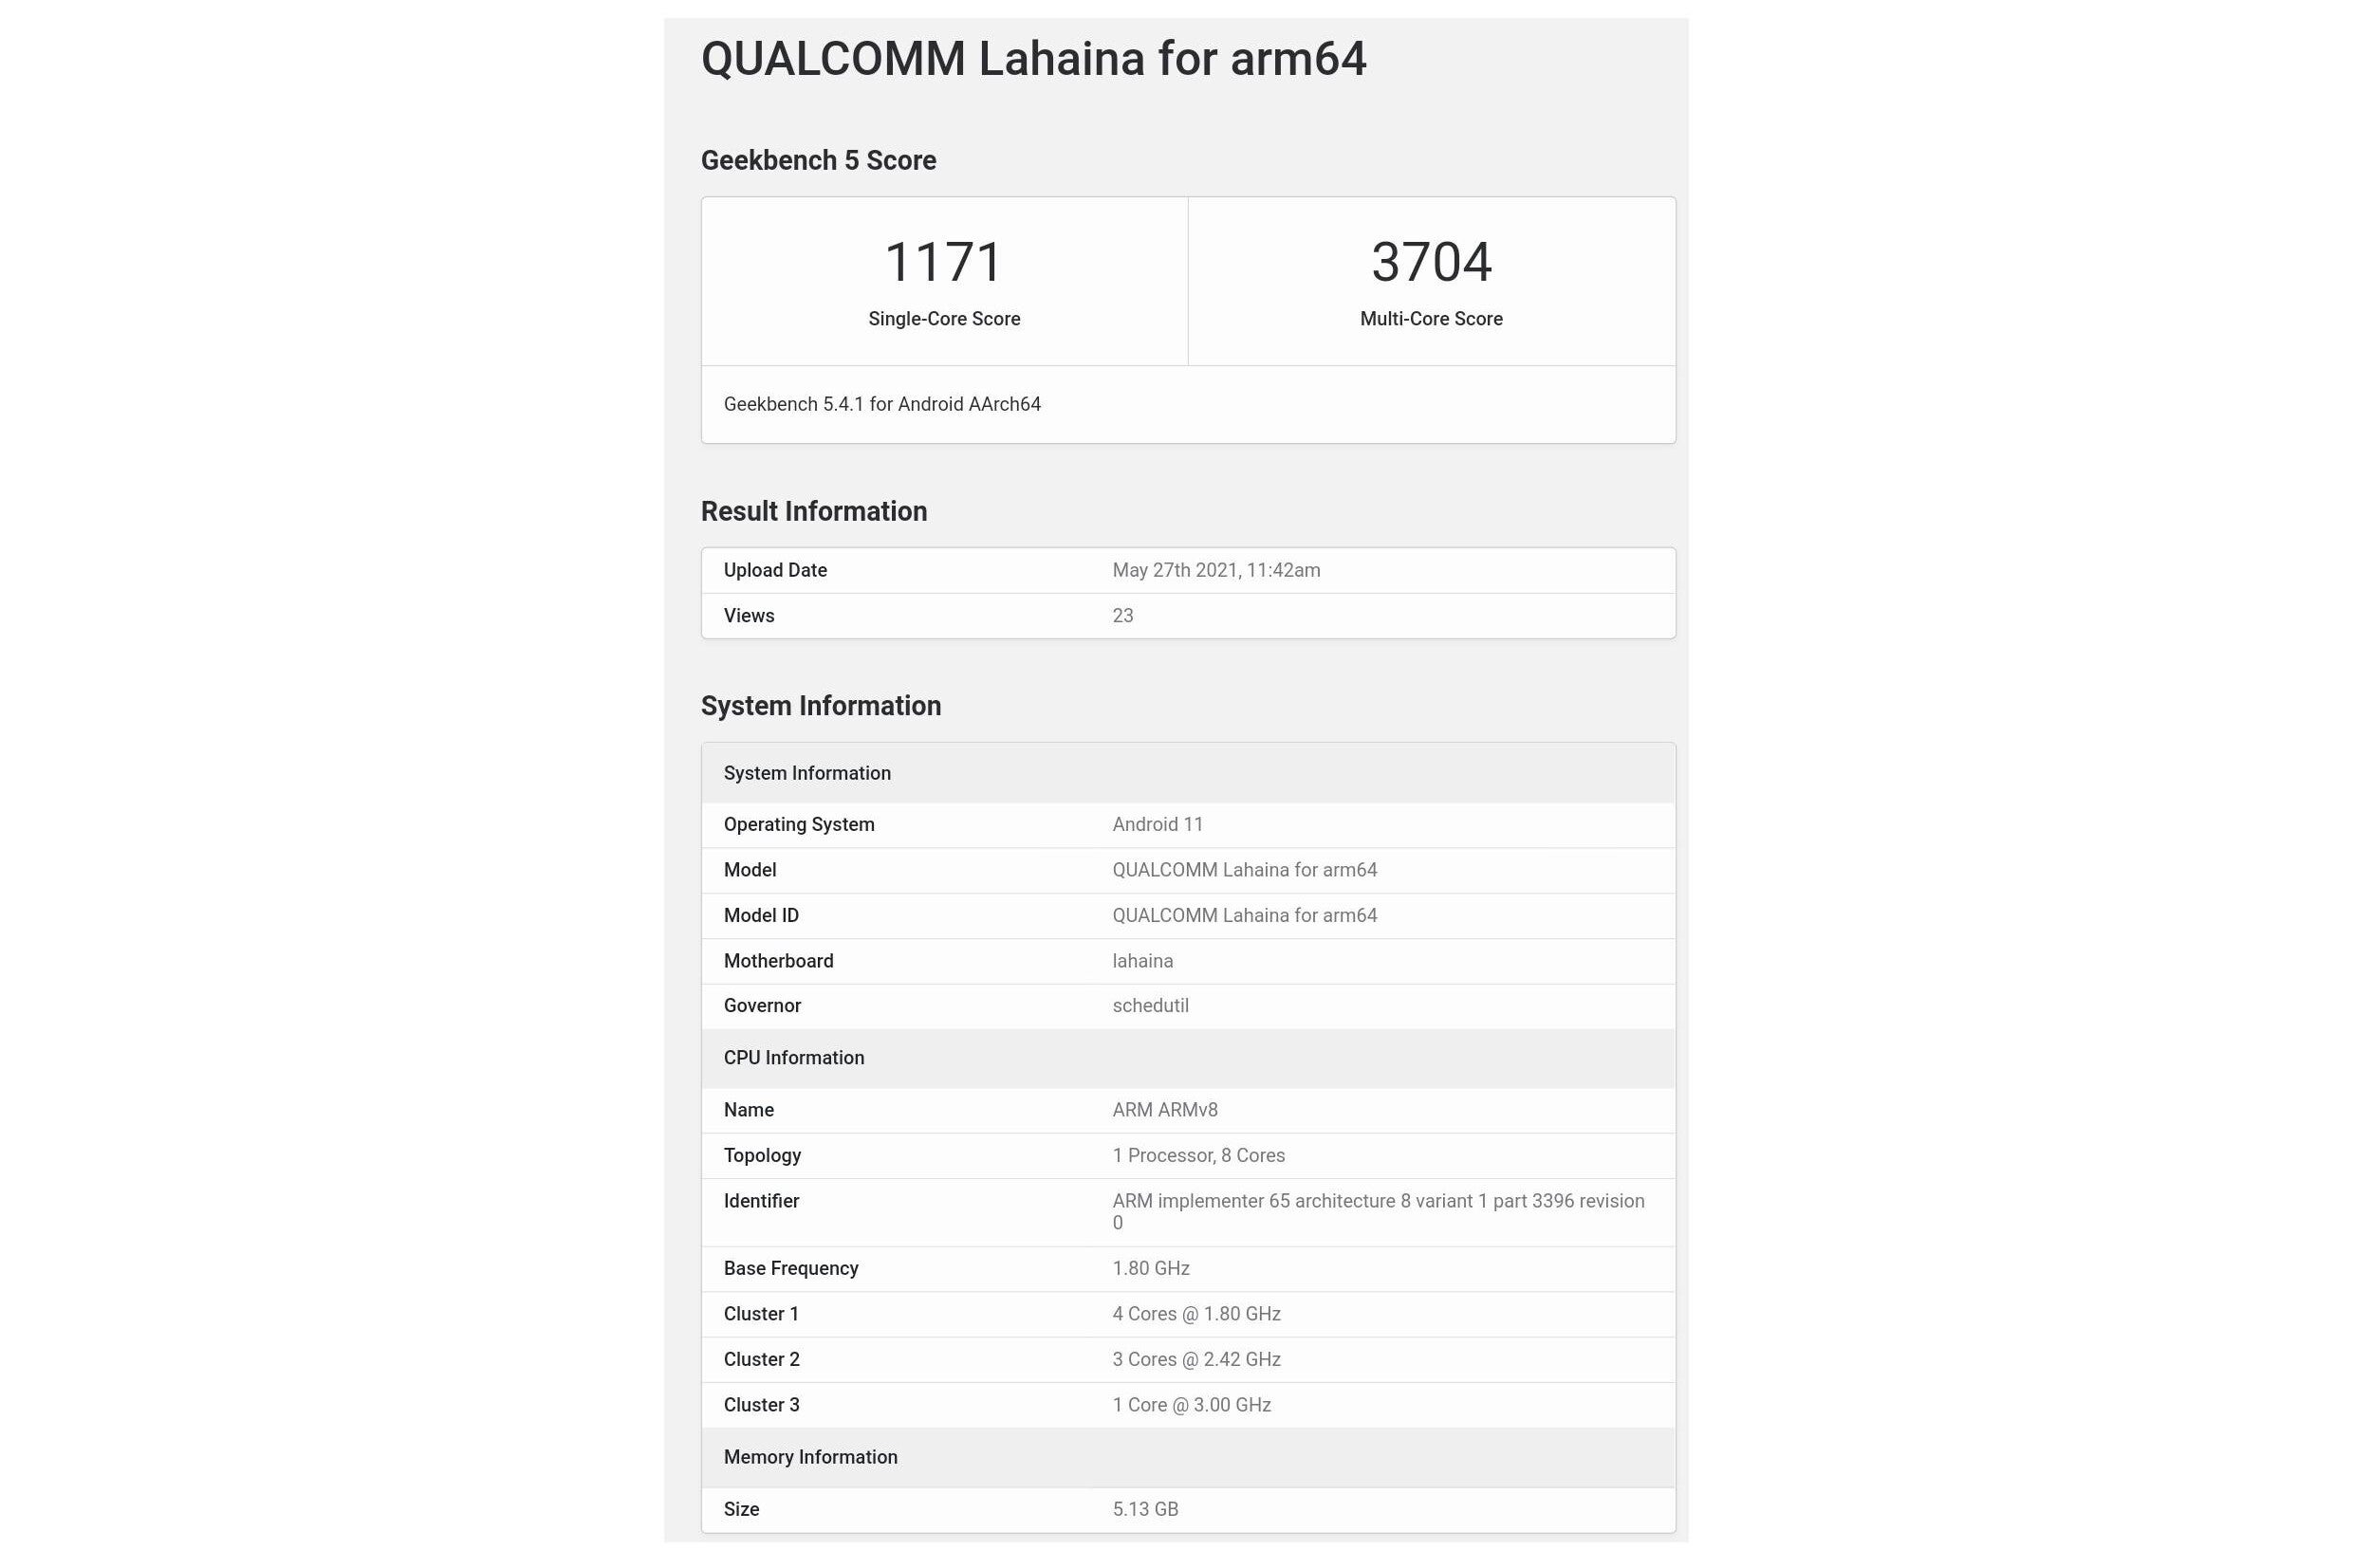 Snapdragon 888+ alleged Geekbench scores - Qualcomm Snapdragon 888+ seemingly turns up on Geekbench